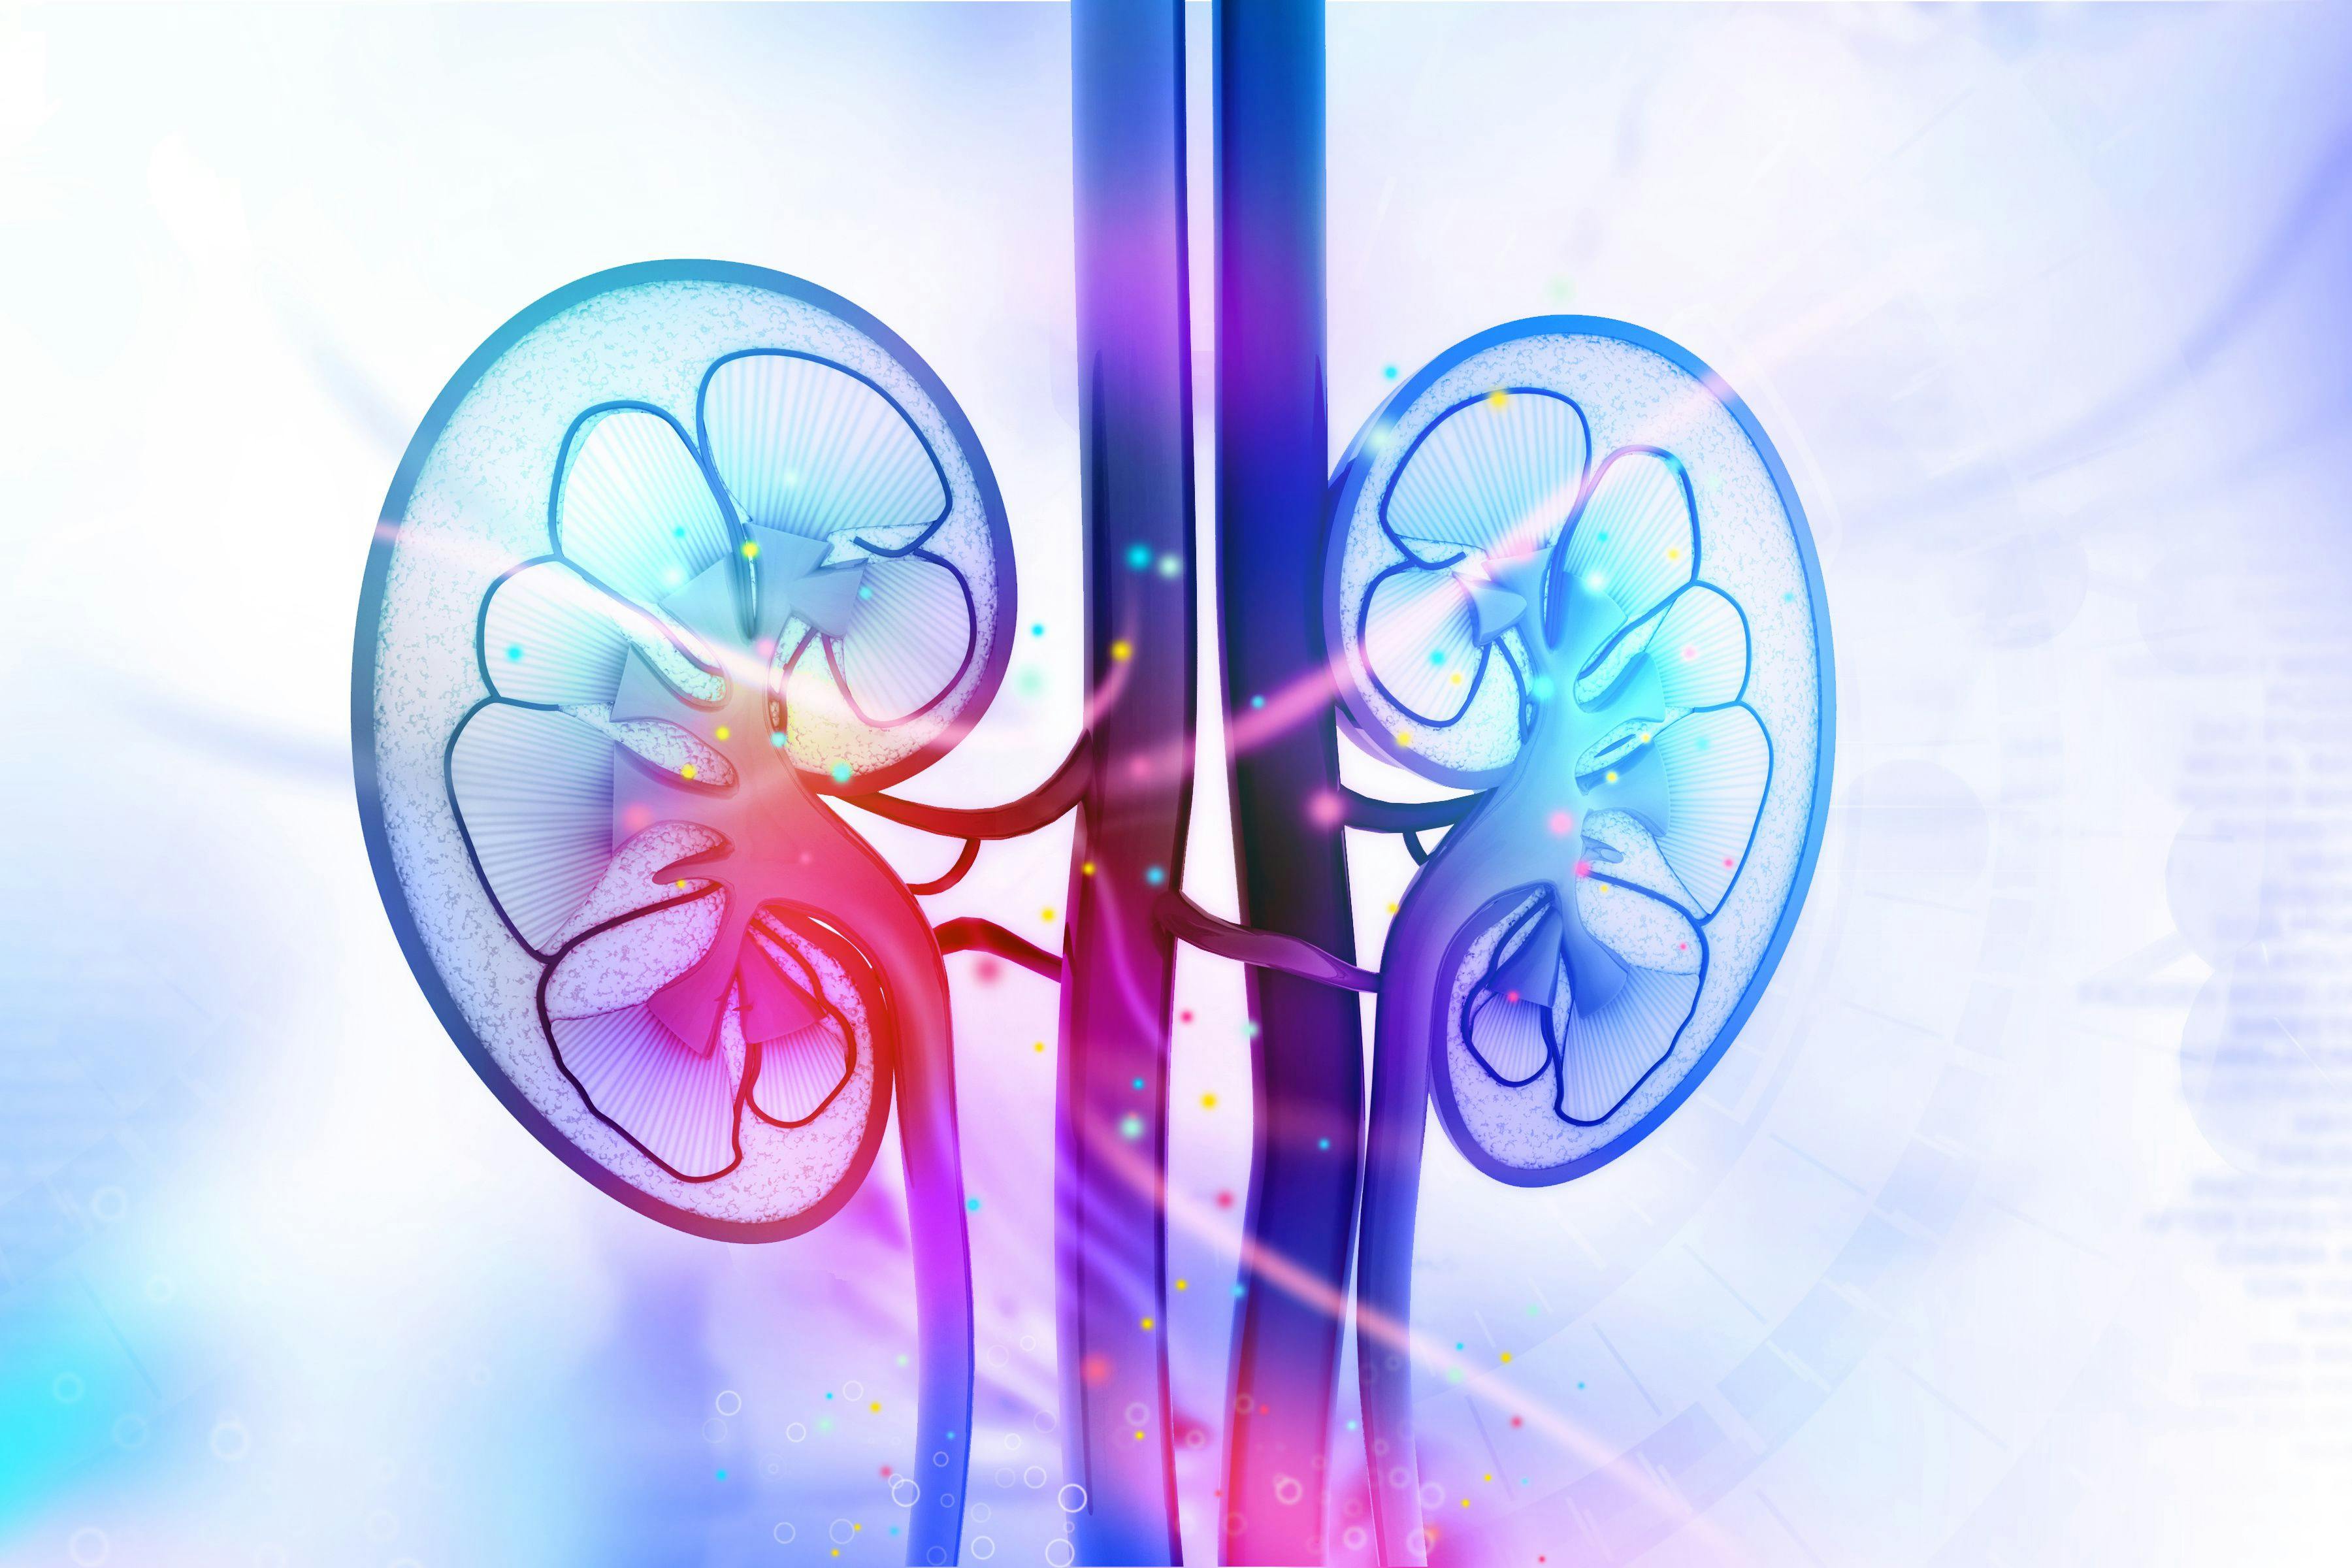 Protein Biomarkers May Indicate Early Kidney Impairment, Study Finds